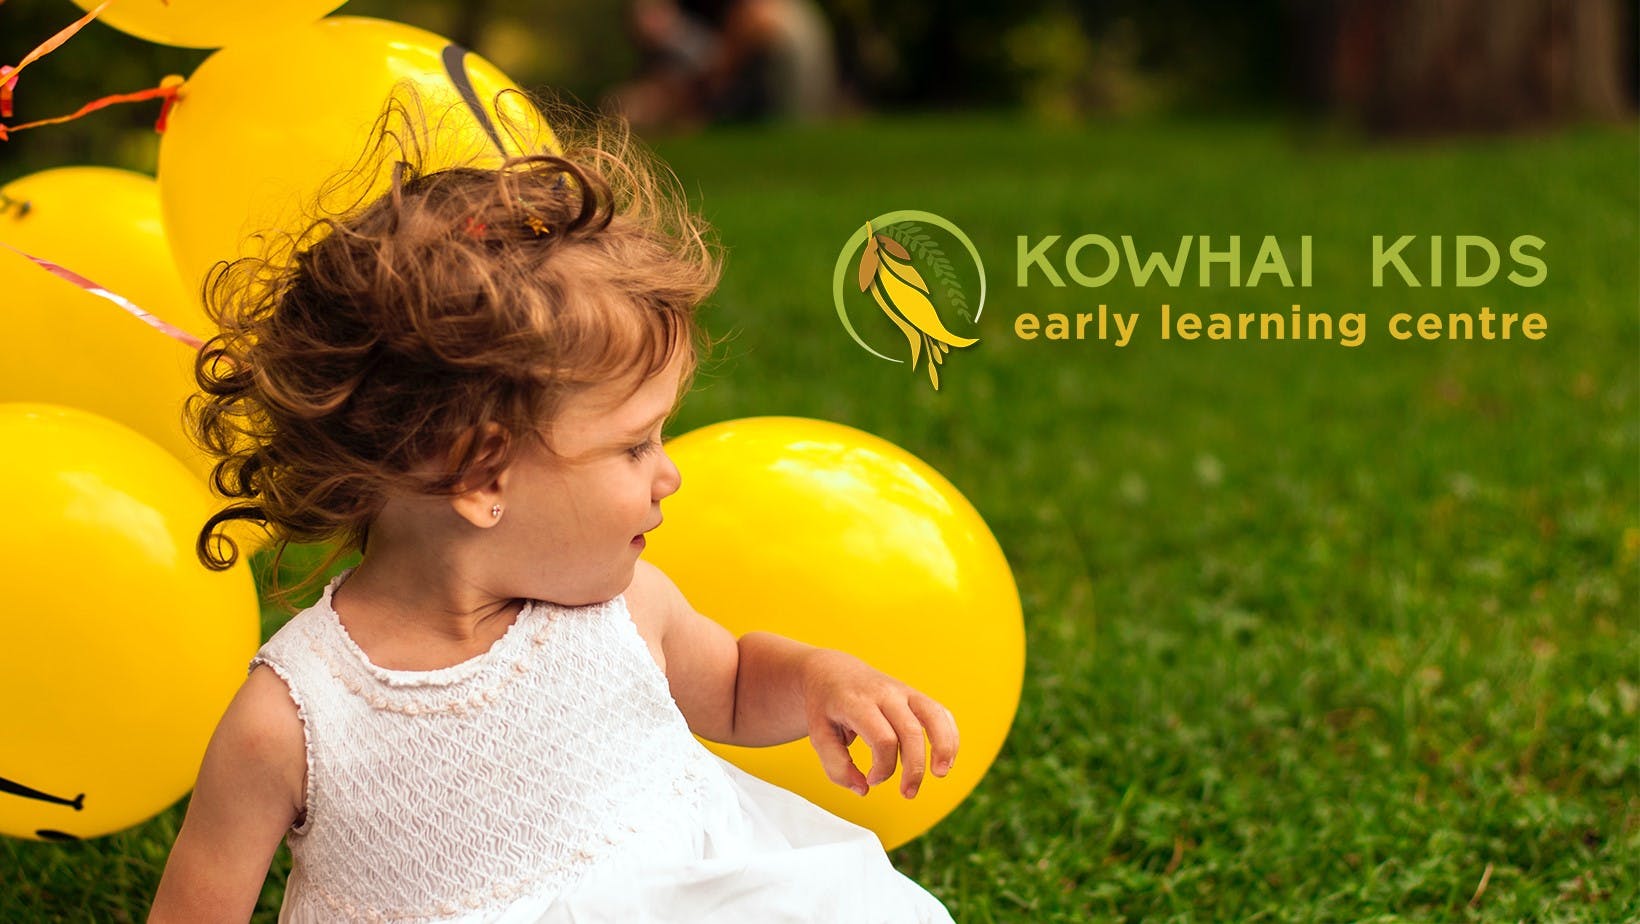 A picture of Kowhai Kids Early Learning Centre